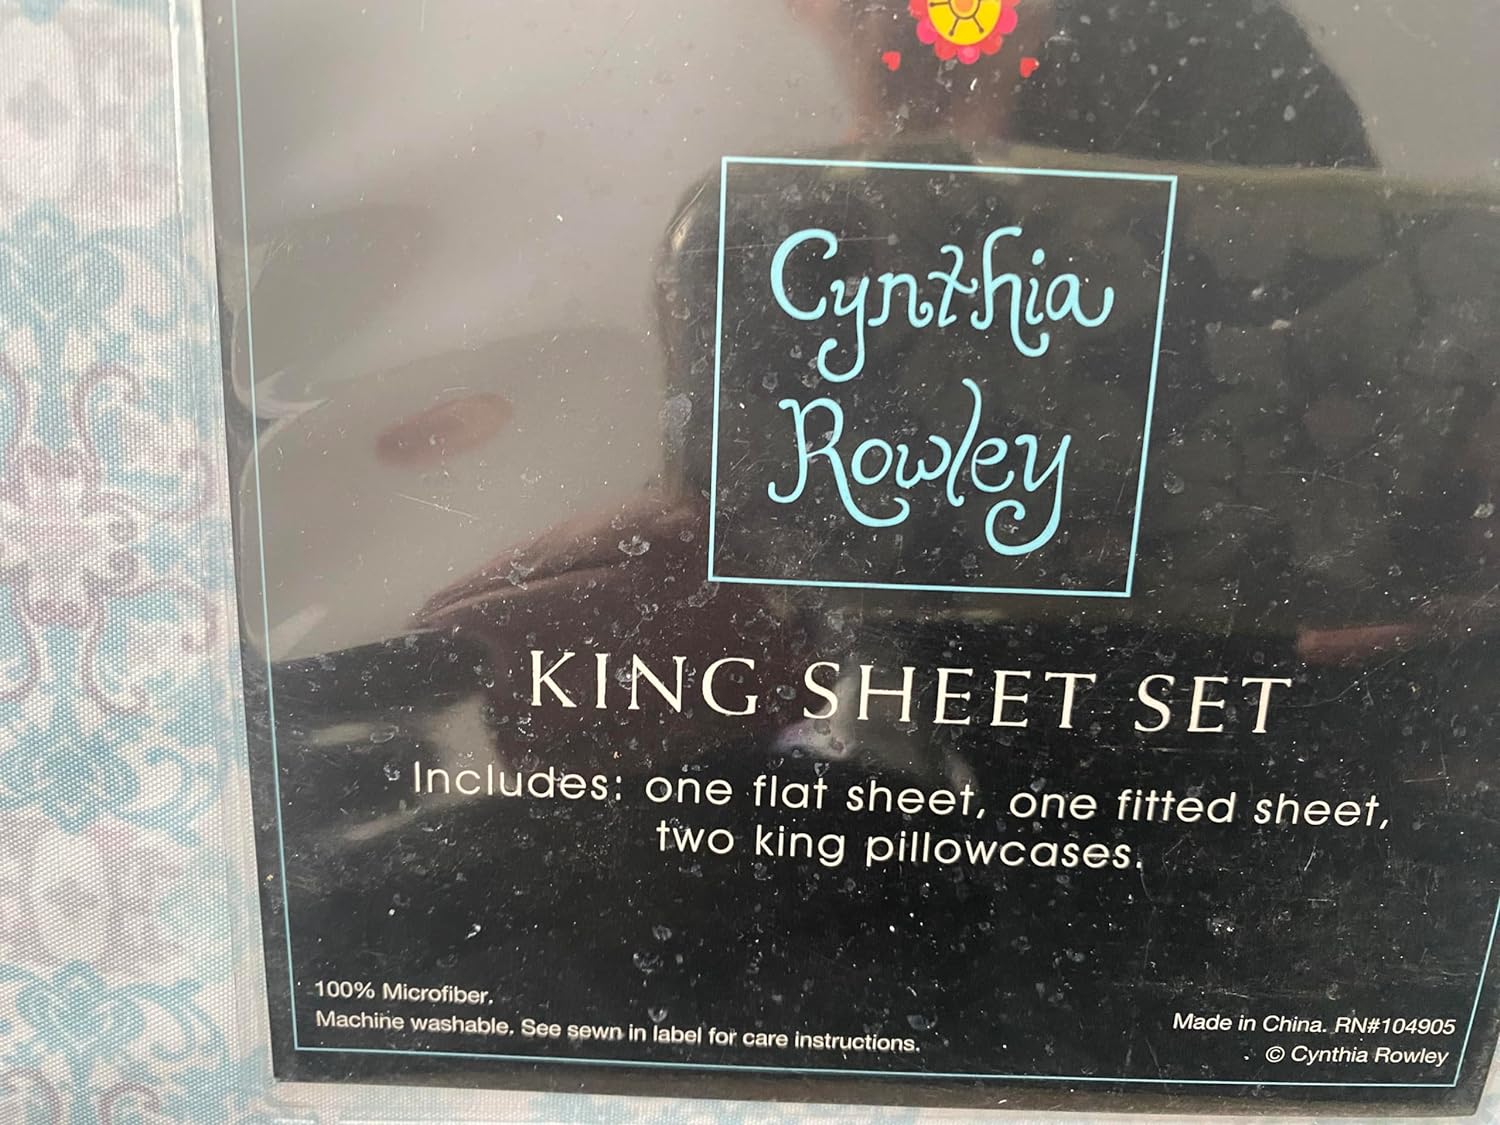 Cynthia Rowley 4 Piece King Sheet Set. Blue And Gray Medallions. 100% Polyester Microfiber. - image 2 of 4